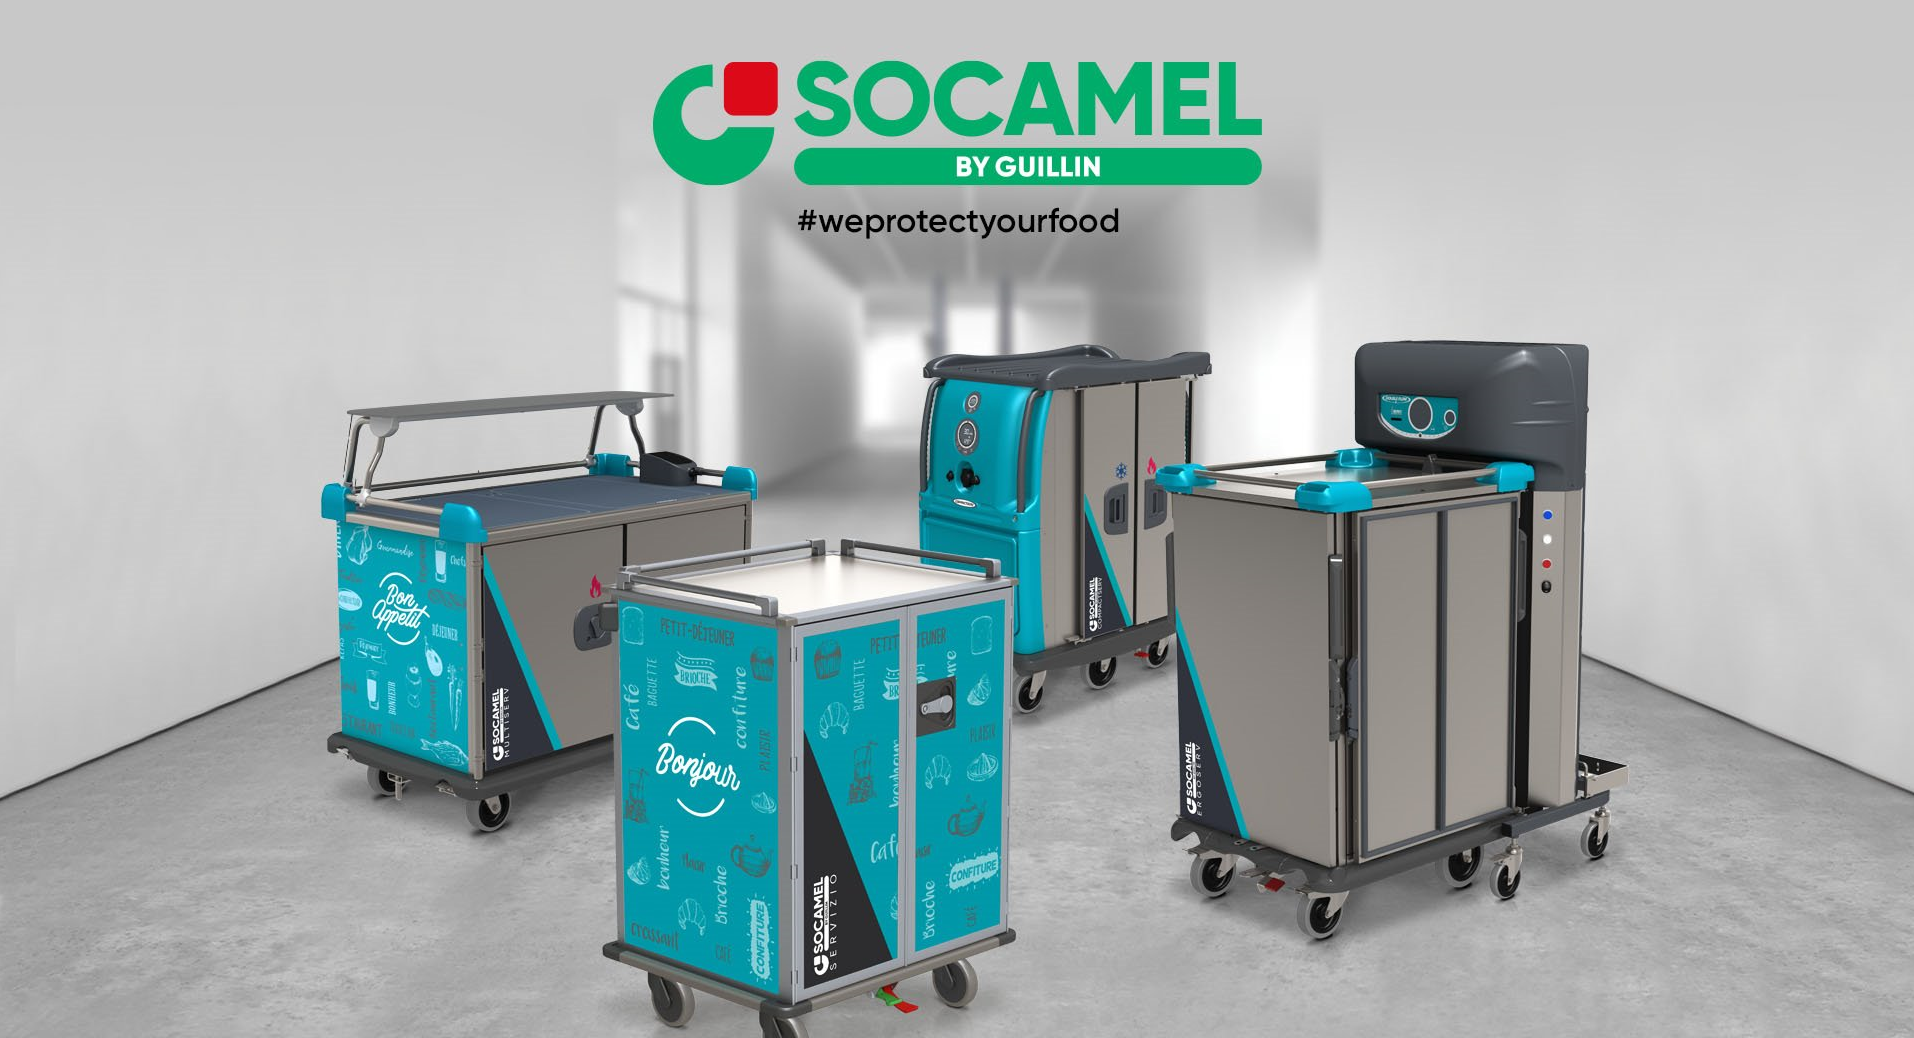 four socamel food delivery trolleys (or carts) and the brand logo in green at the top of the image.